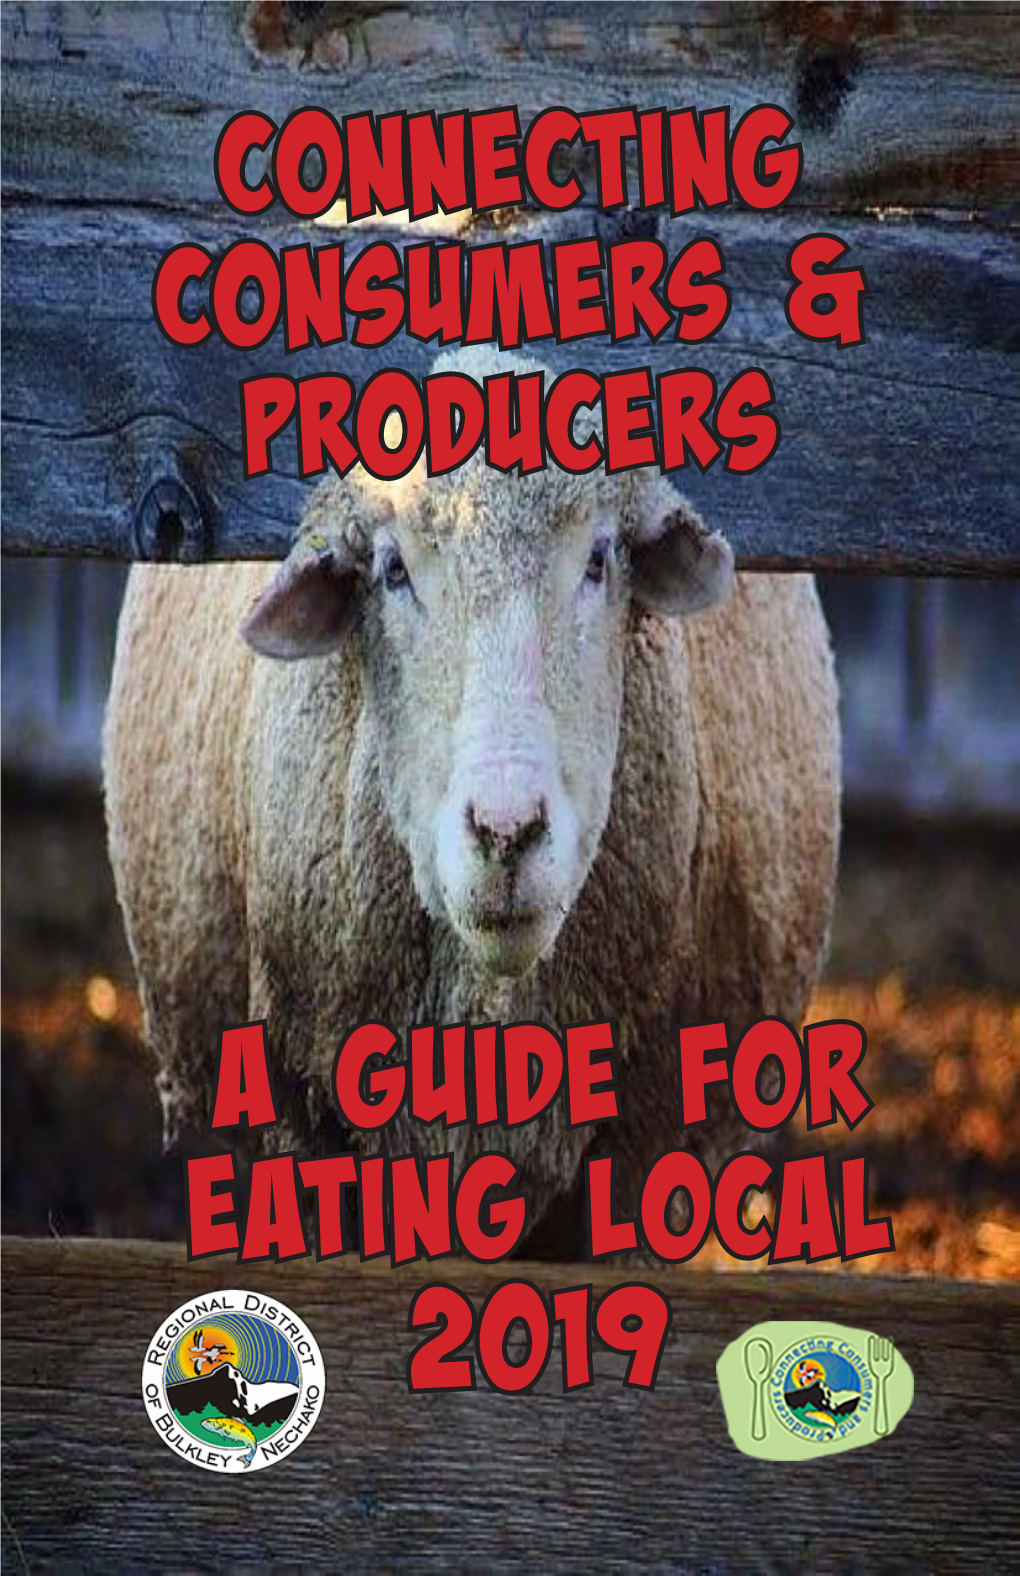 A Guide for Eating Local 2019 There Is a Growing Movement in Our Region Toward Consumption of Locally Grown Food Products